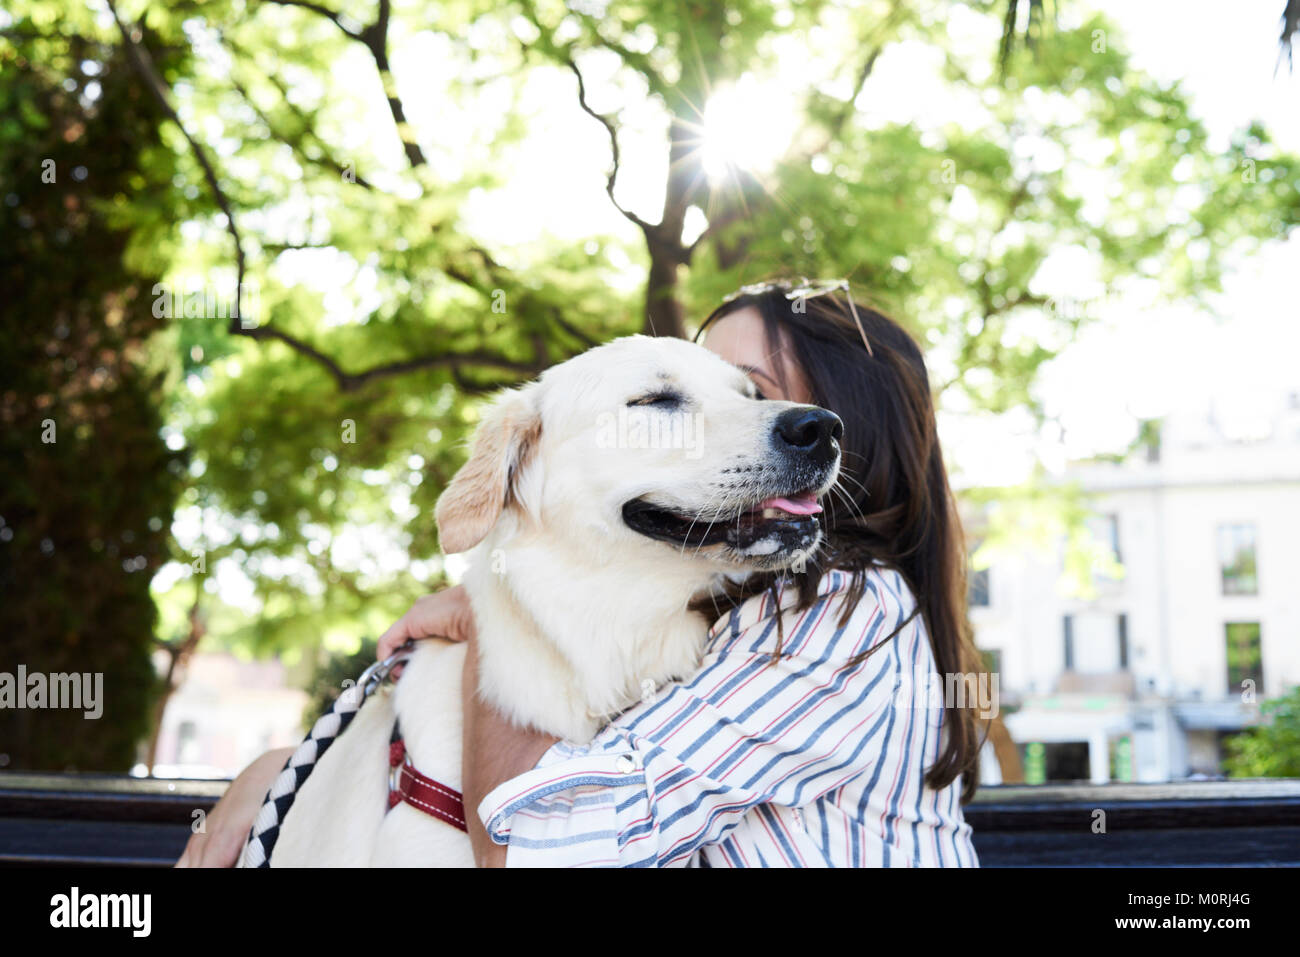 Tenderness hug between a Golden dog and his owner sitting on a bench against sunlight. Stock Photo